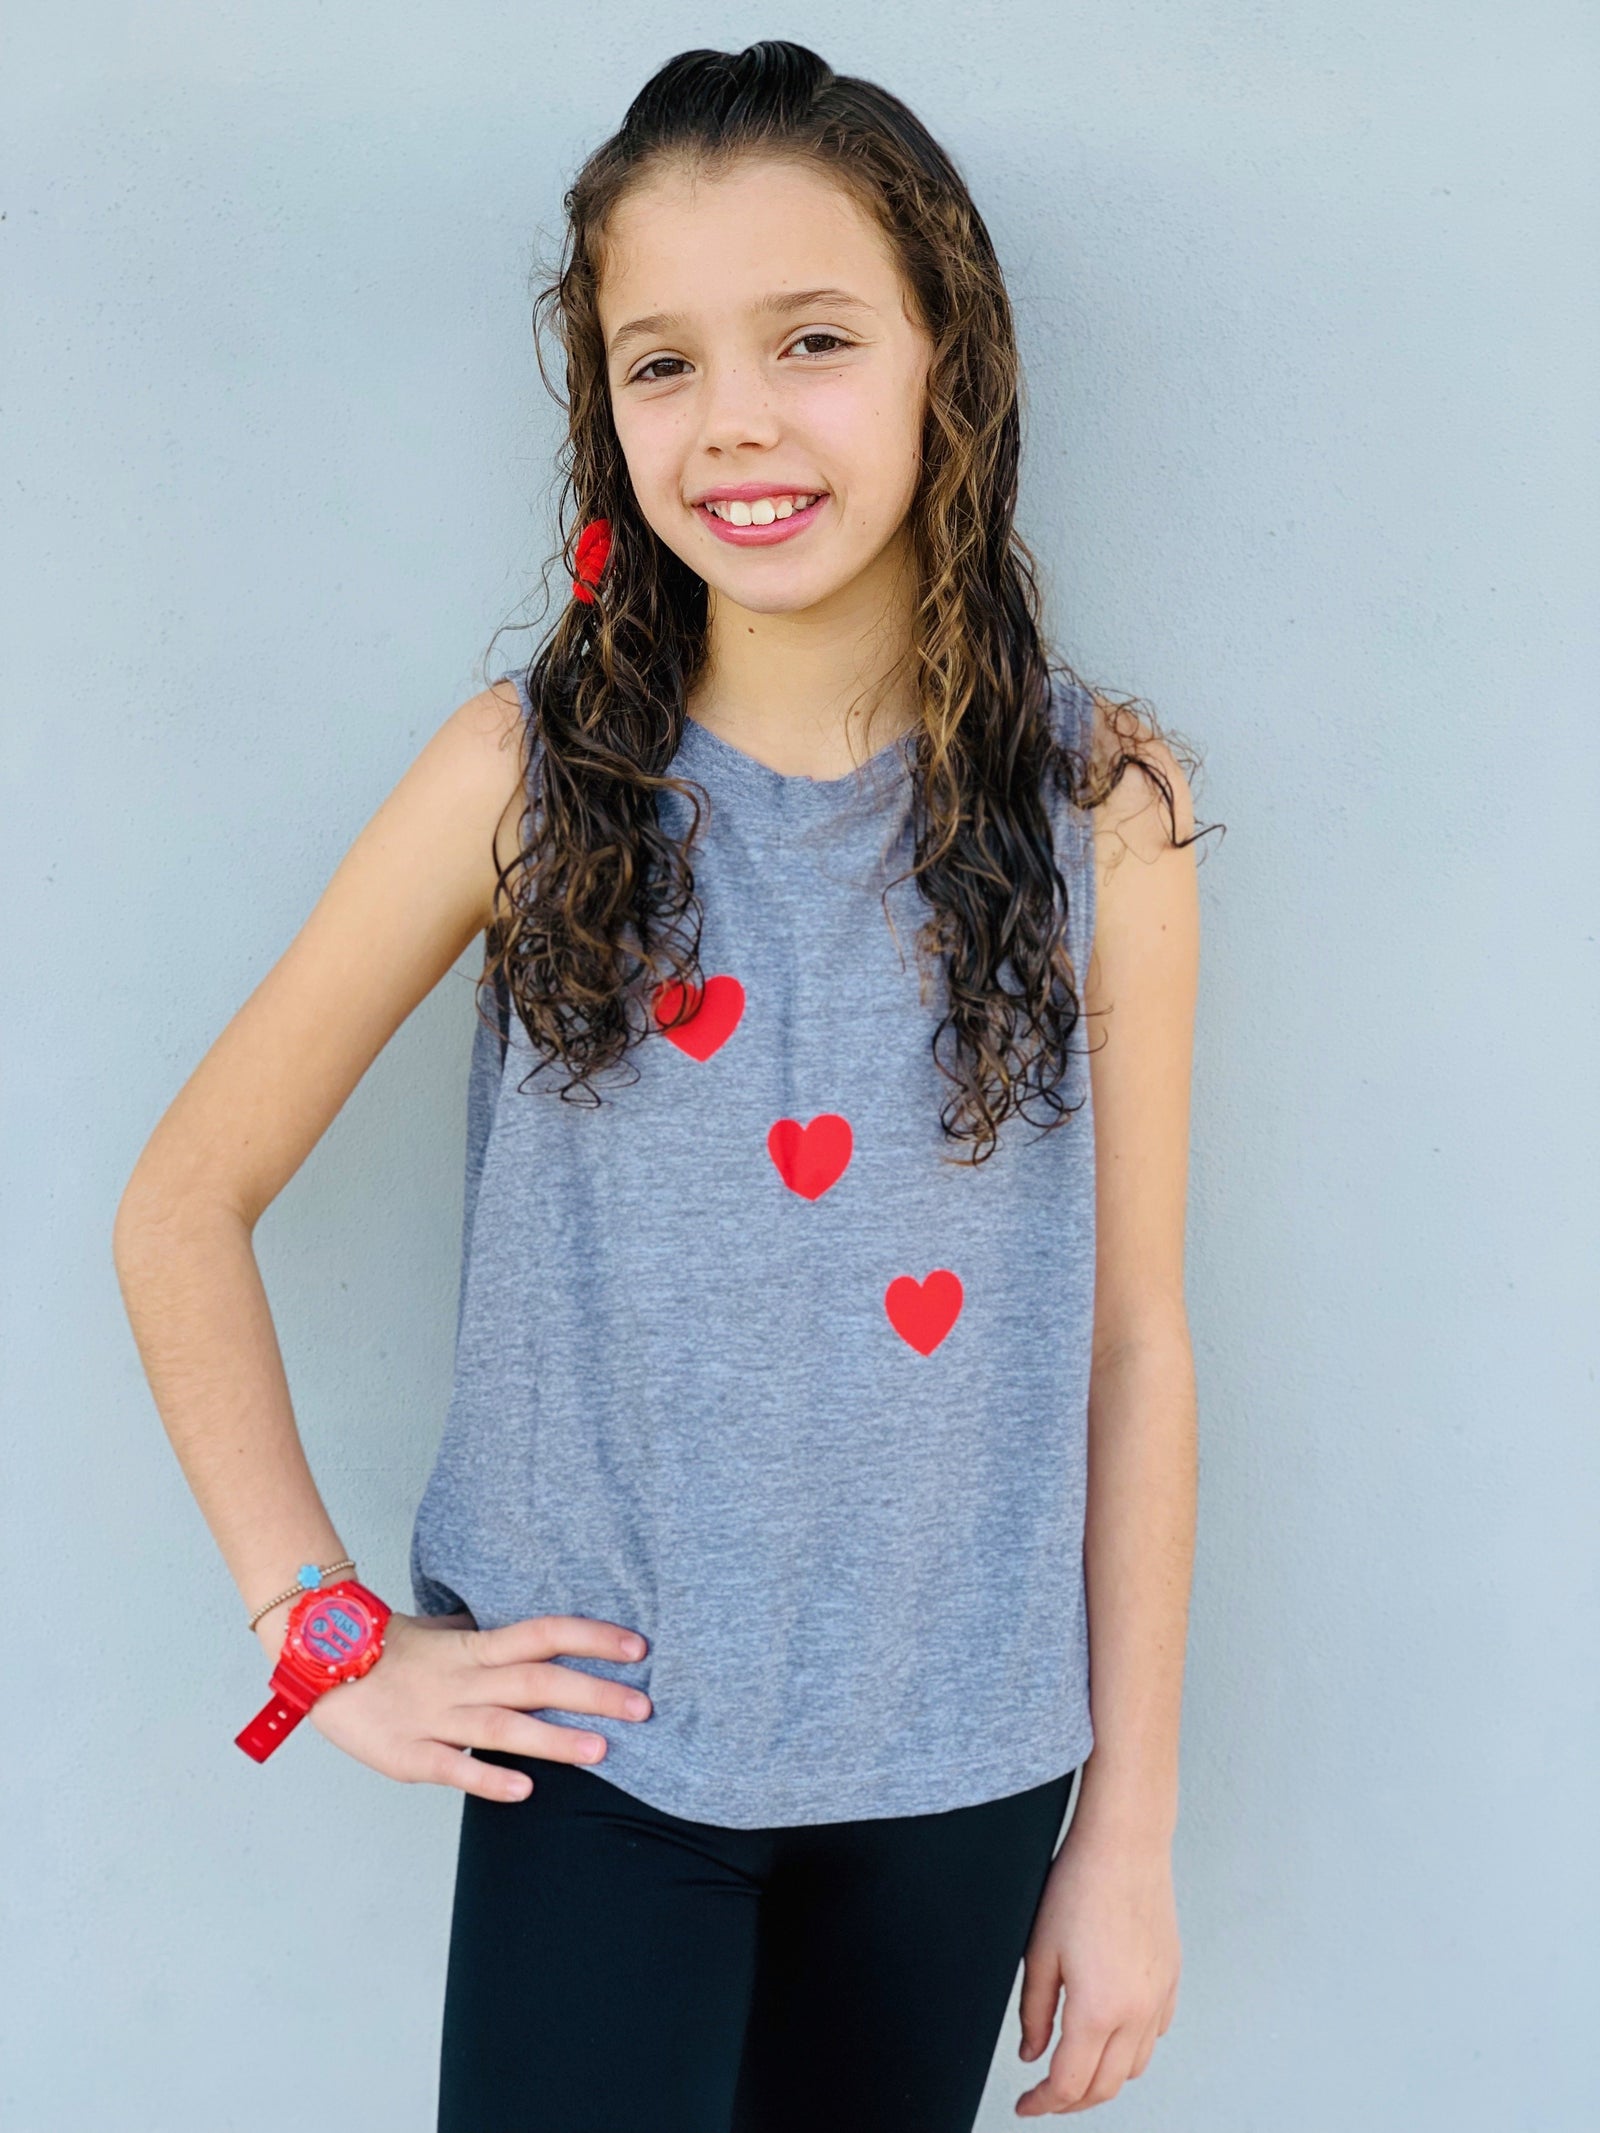 Hearts Red Grey Dry Fit Sleeveless Kids Girl's Tank